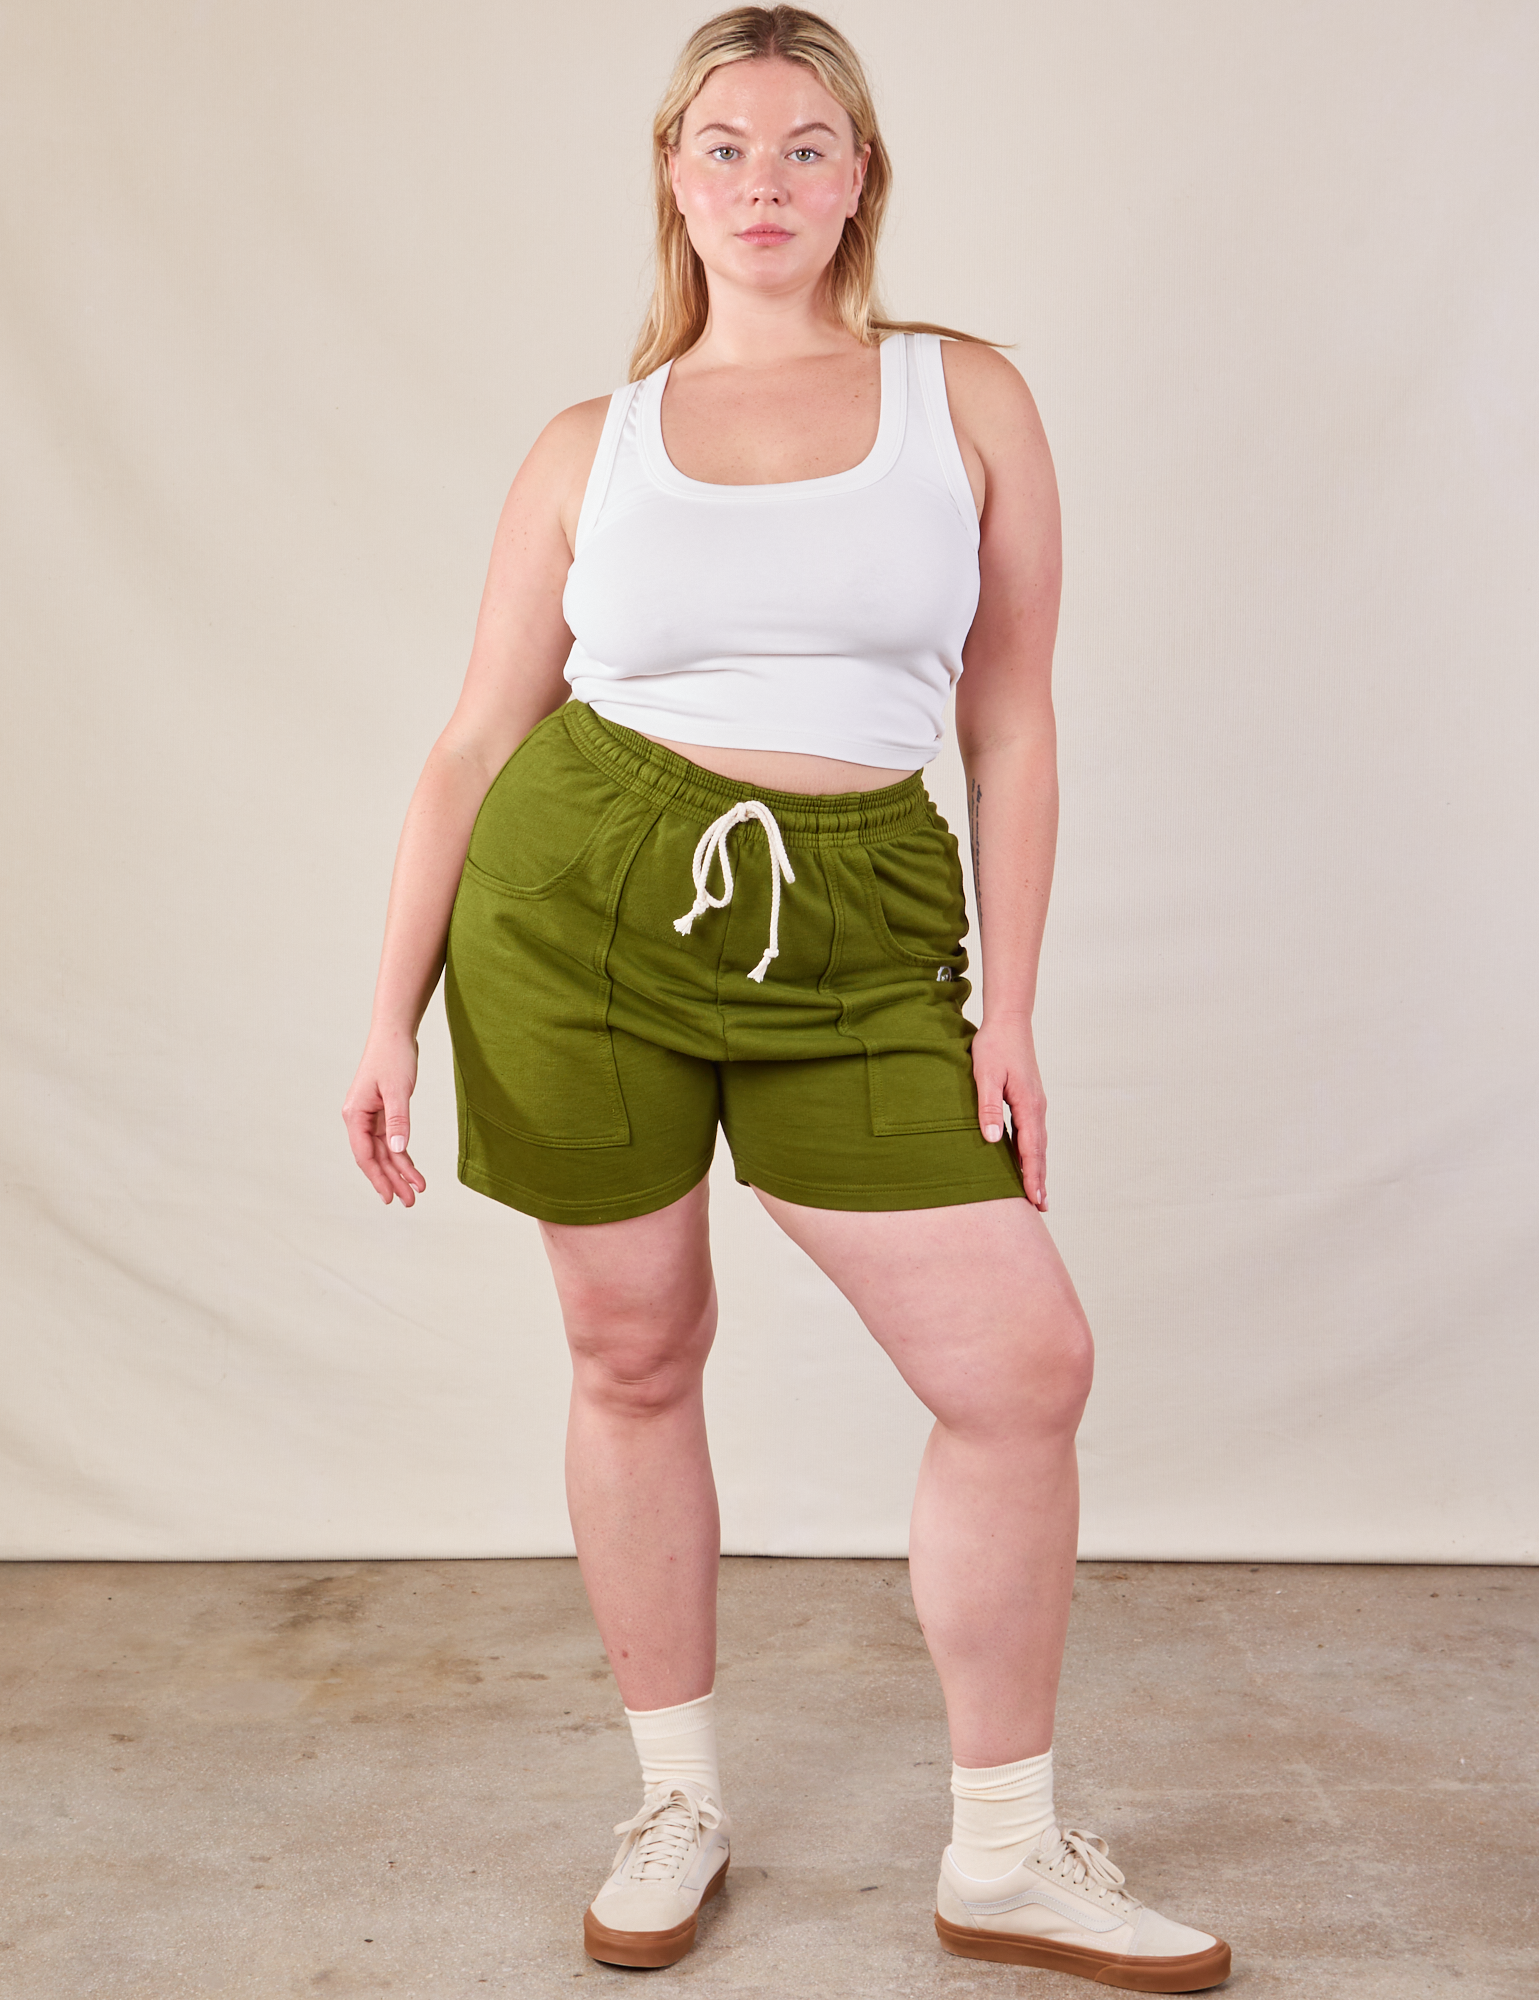 Lish is wearing Lightweight Sweat Shorts in Summer Olive and Cropped Tank in vintage tee off-white